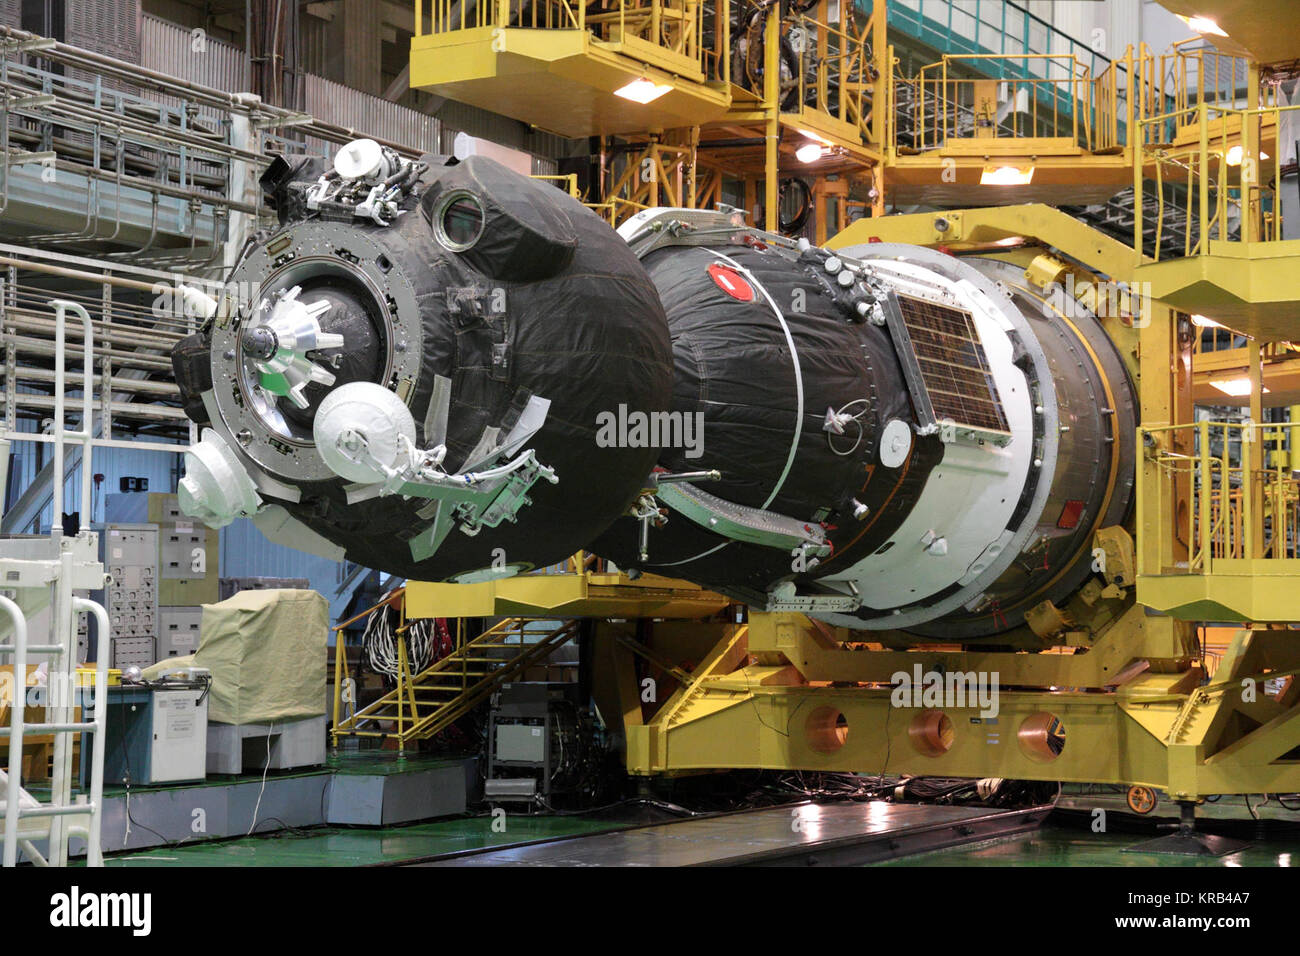 At the Baikonur Cosmodrome in Kazakhstan, the Soyuz TMA-05M spacecraft is readied for its encapsulation into the upper stage of its Soyuz booster July 8, 2012 in advance of its rollout to the launch pad July 12 and the launch of its occupants, Expedition 32/33 Soyuz Commander Yuri Malenchenko, NASA Flight Engineer Sunita Williams and Flight Engineer Aki Hoshide of the Japan Aerospace Exploration Agency July 15 for a four-month mission on the International Space Station.  NASA/Victor Zelentsov Soyuz TMA-05M spacecraft integration facility 2 Stock Photo